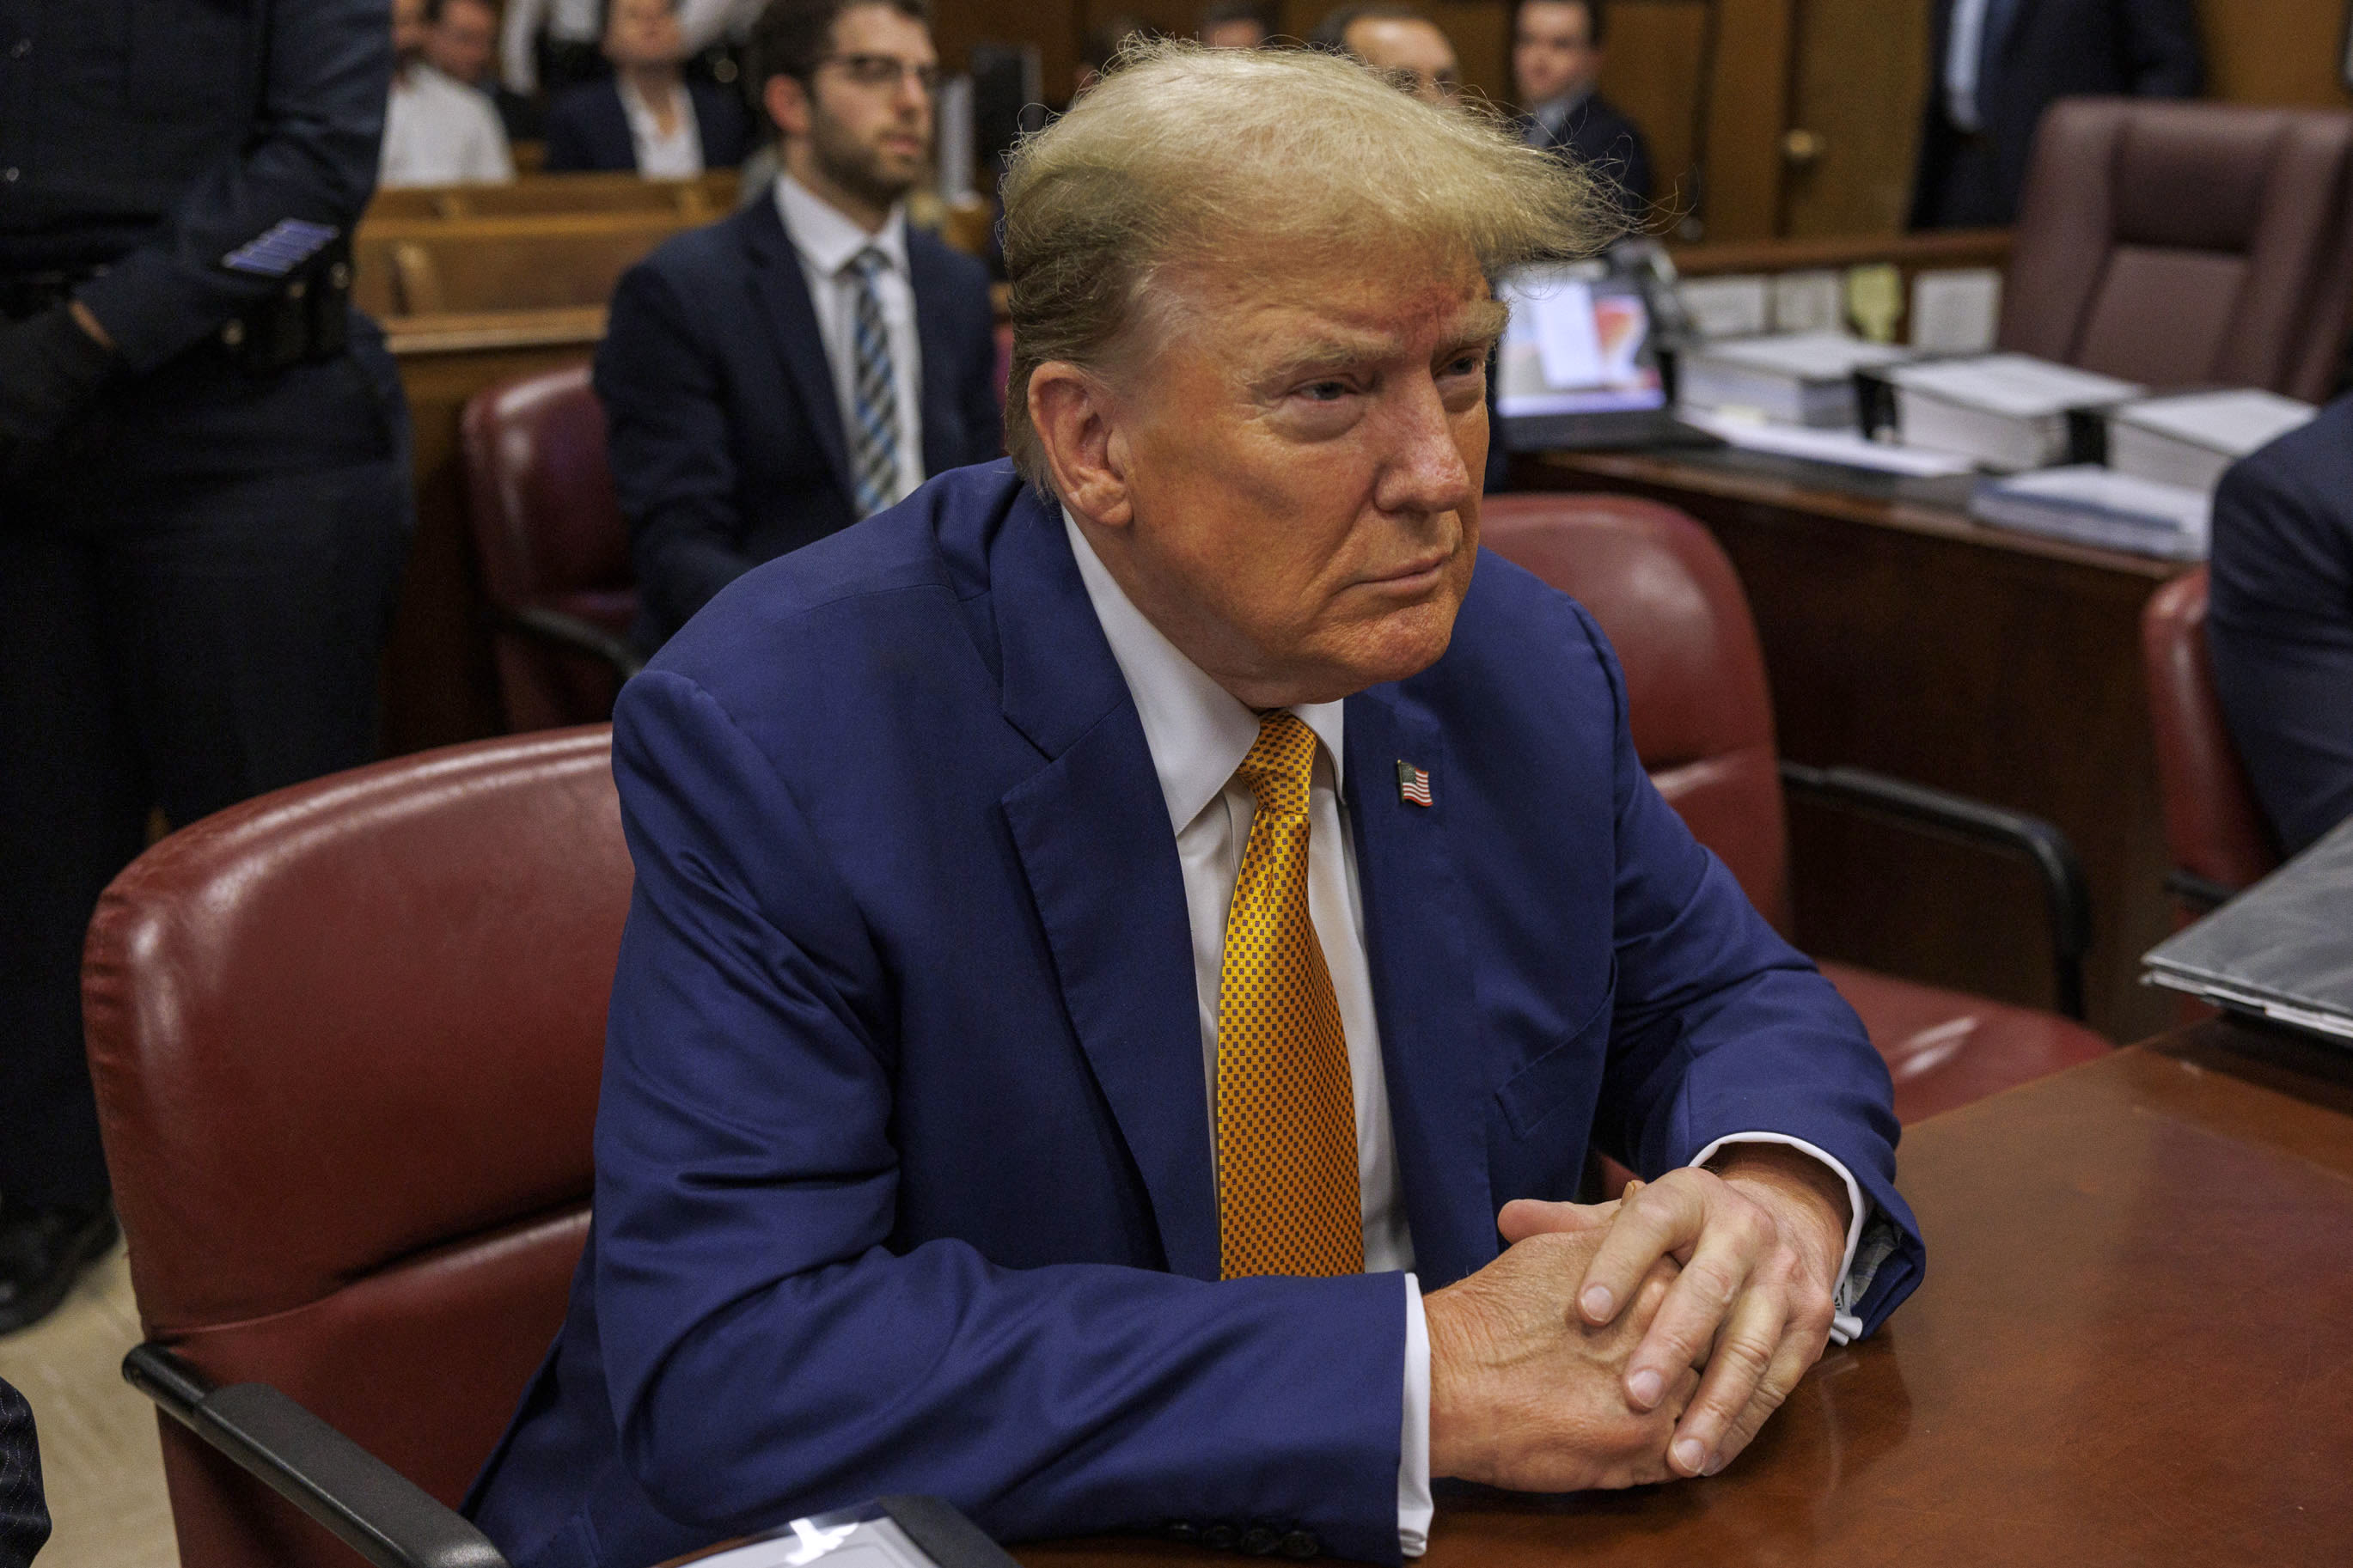 Donald Trump just had his "best 5 minutes" in New York trial—Legal analyst